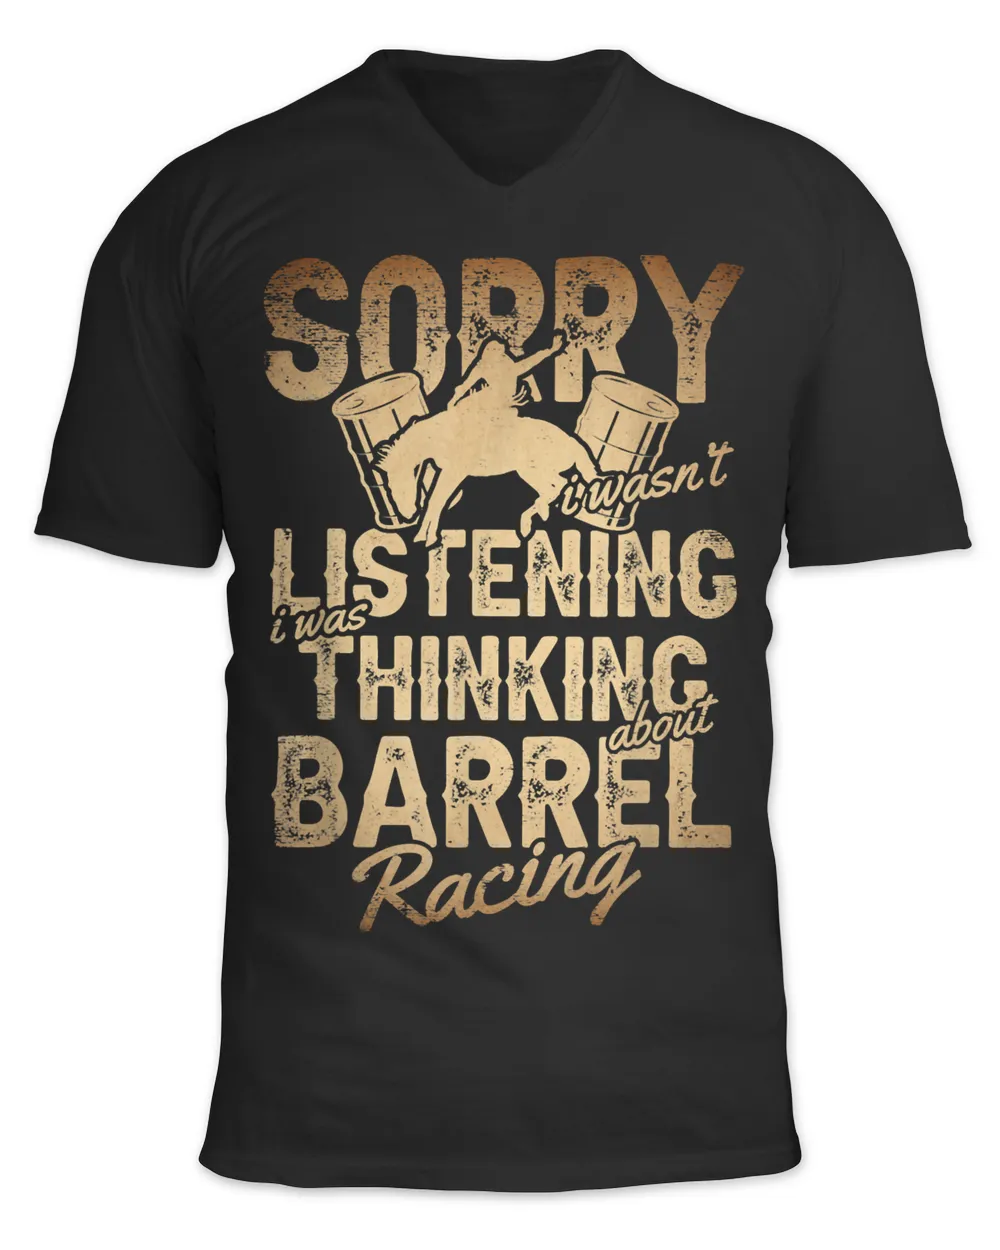 I Wasnt Listening I was thinking about barrel racing Racer